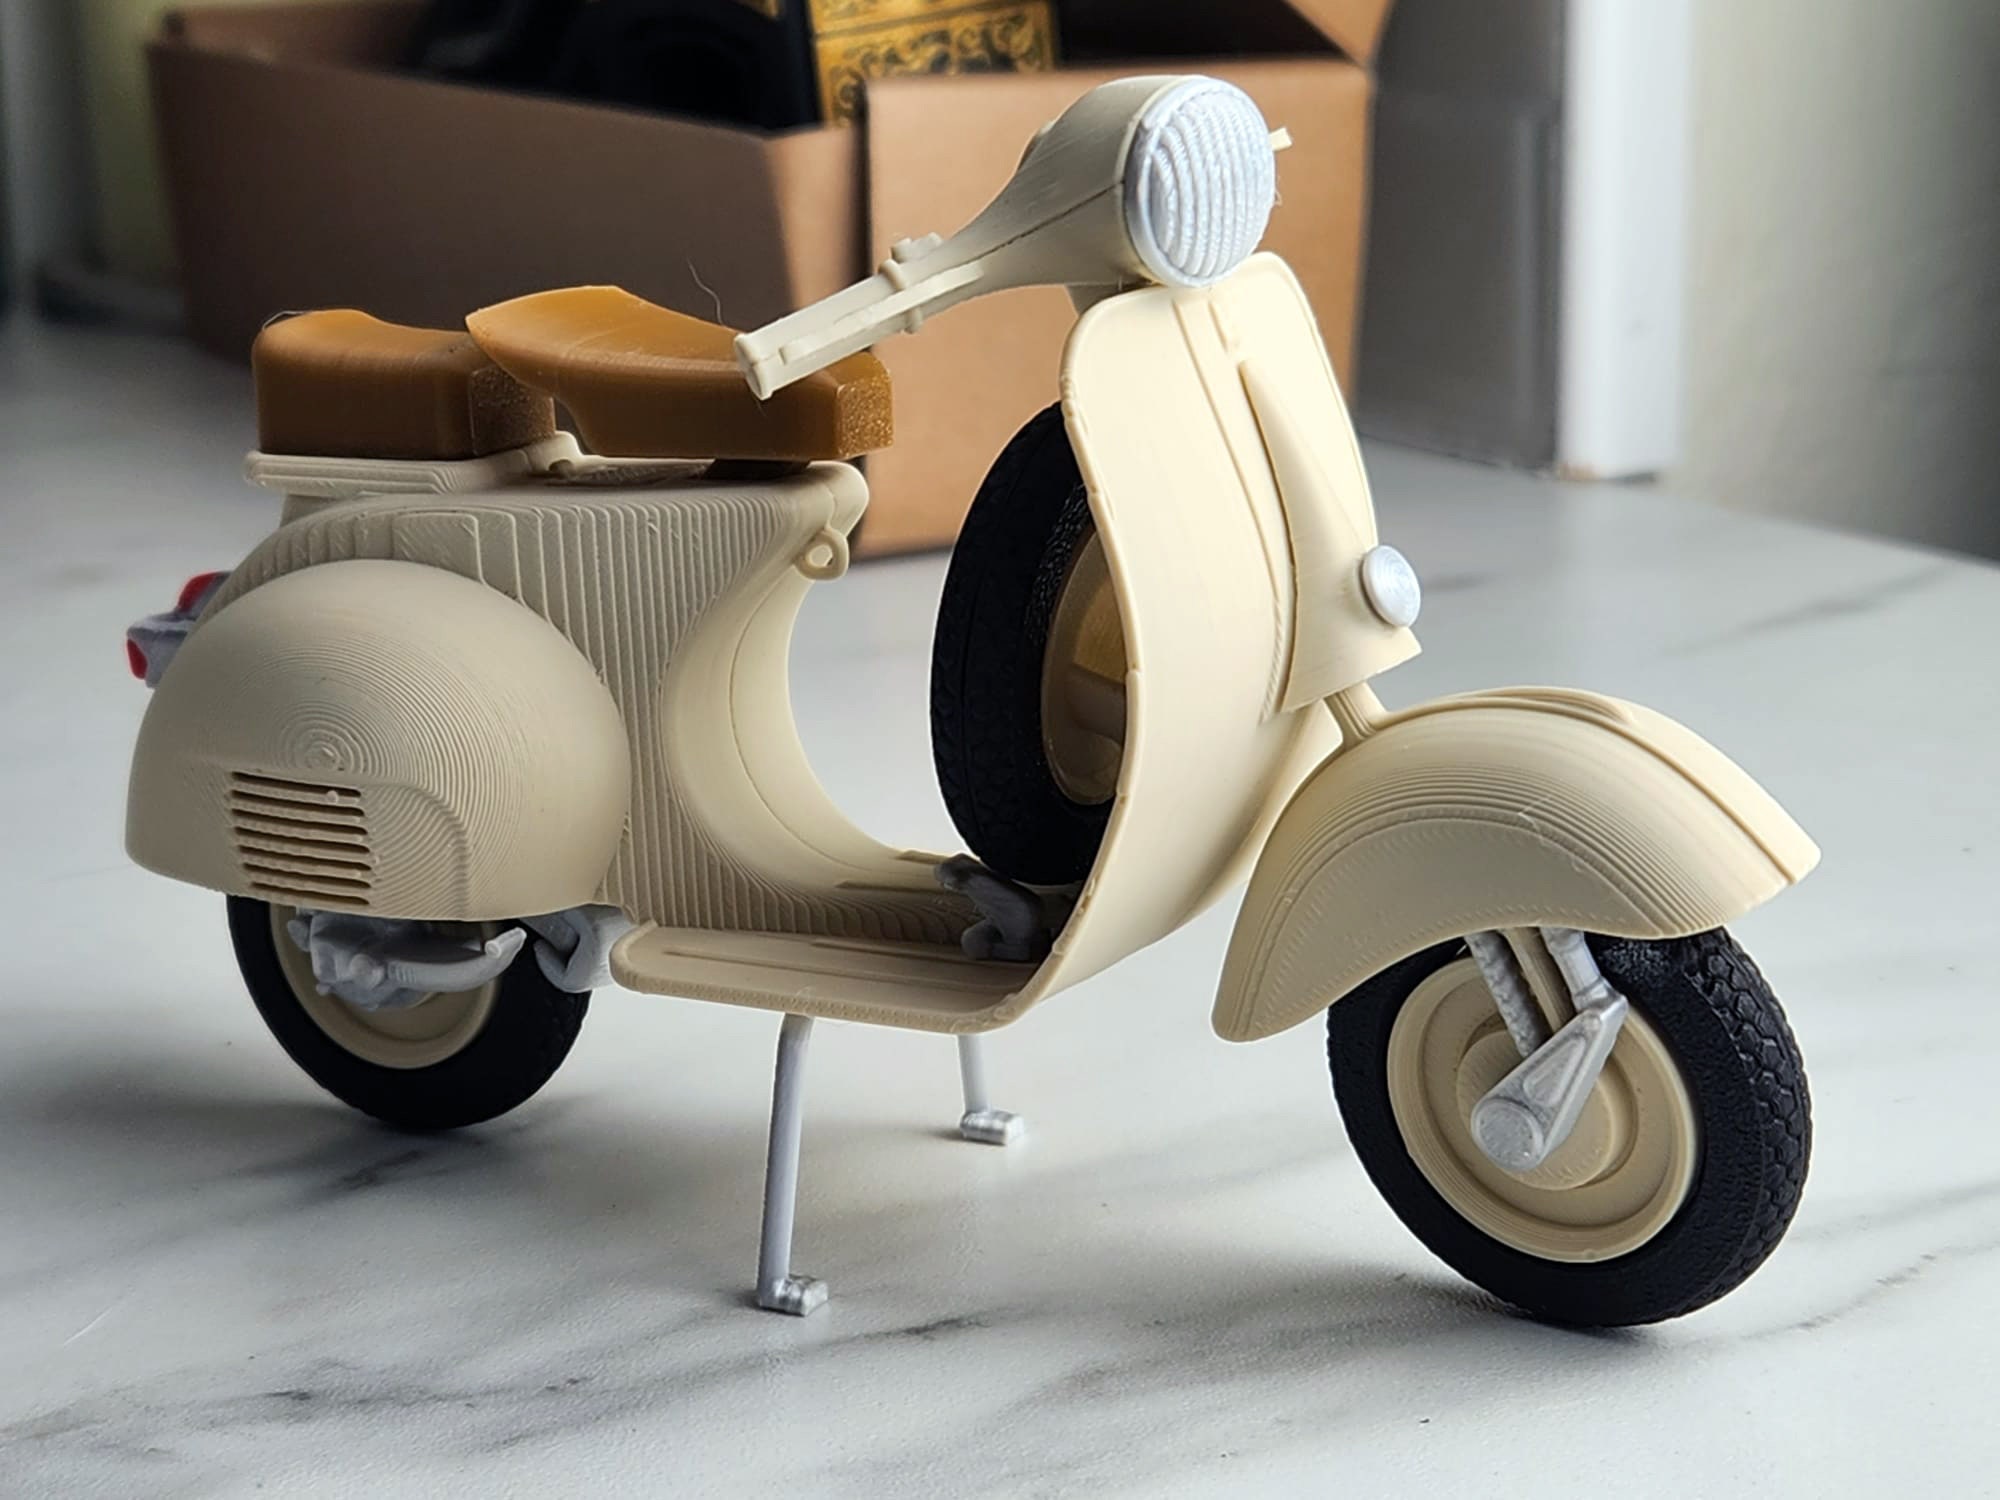 MOPED SCOOTER MINIATURE VESPA COLLECTIBLE MINI CLOCK GIFT